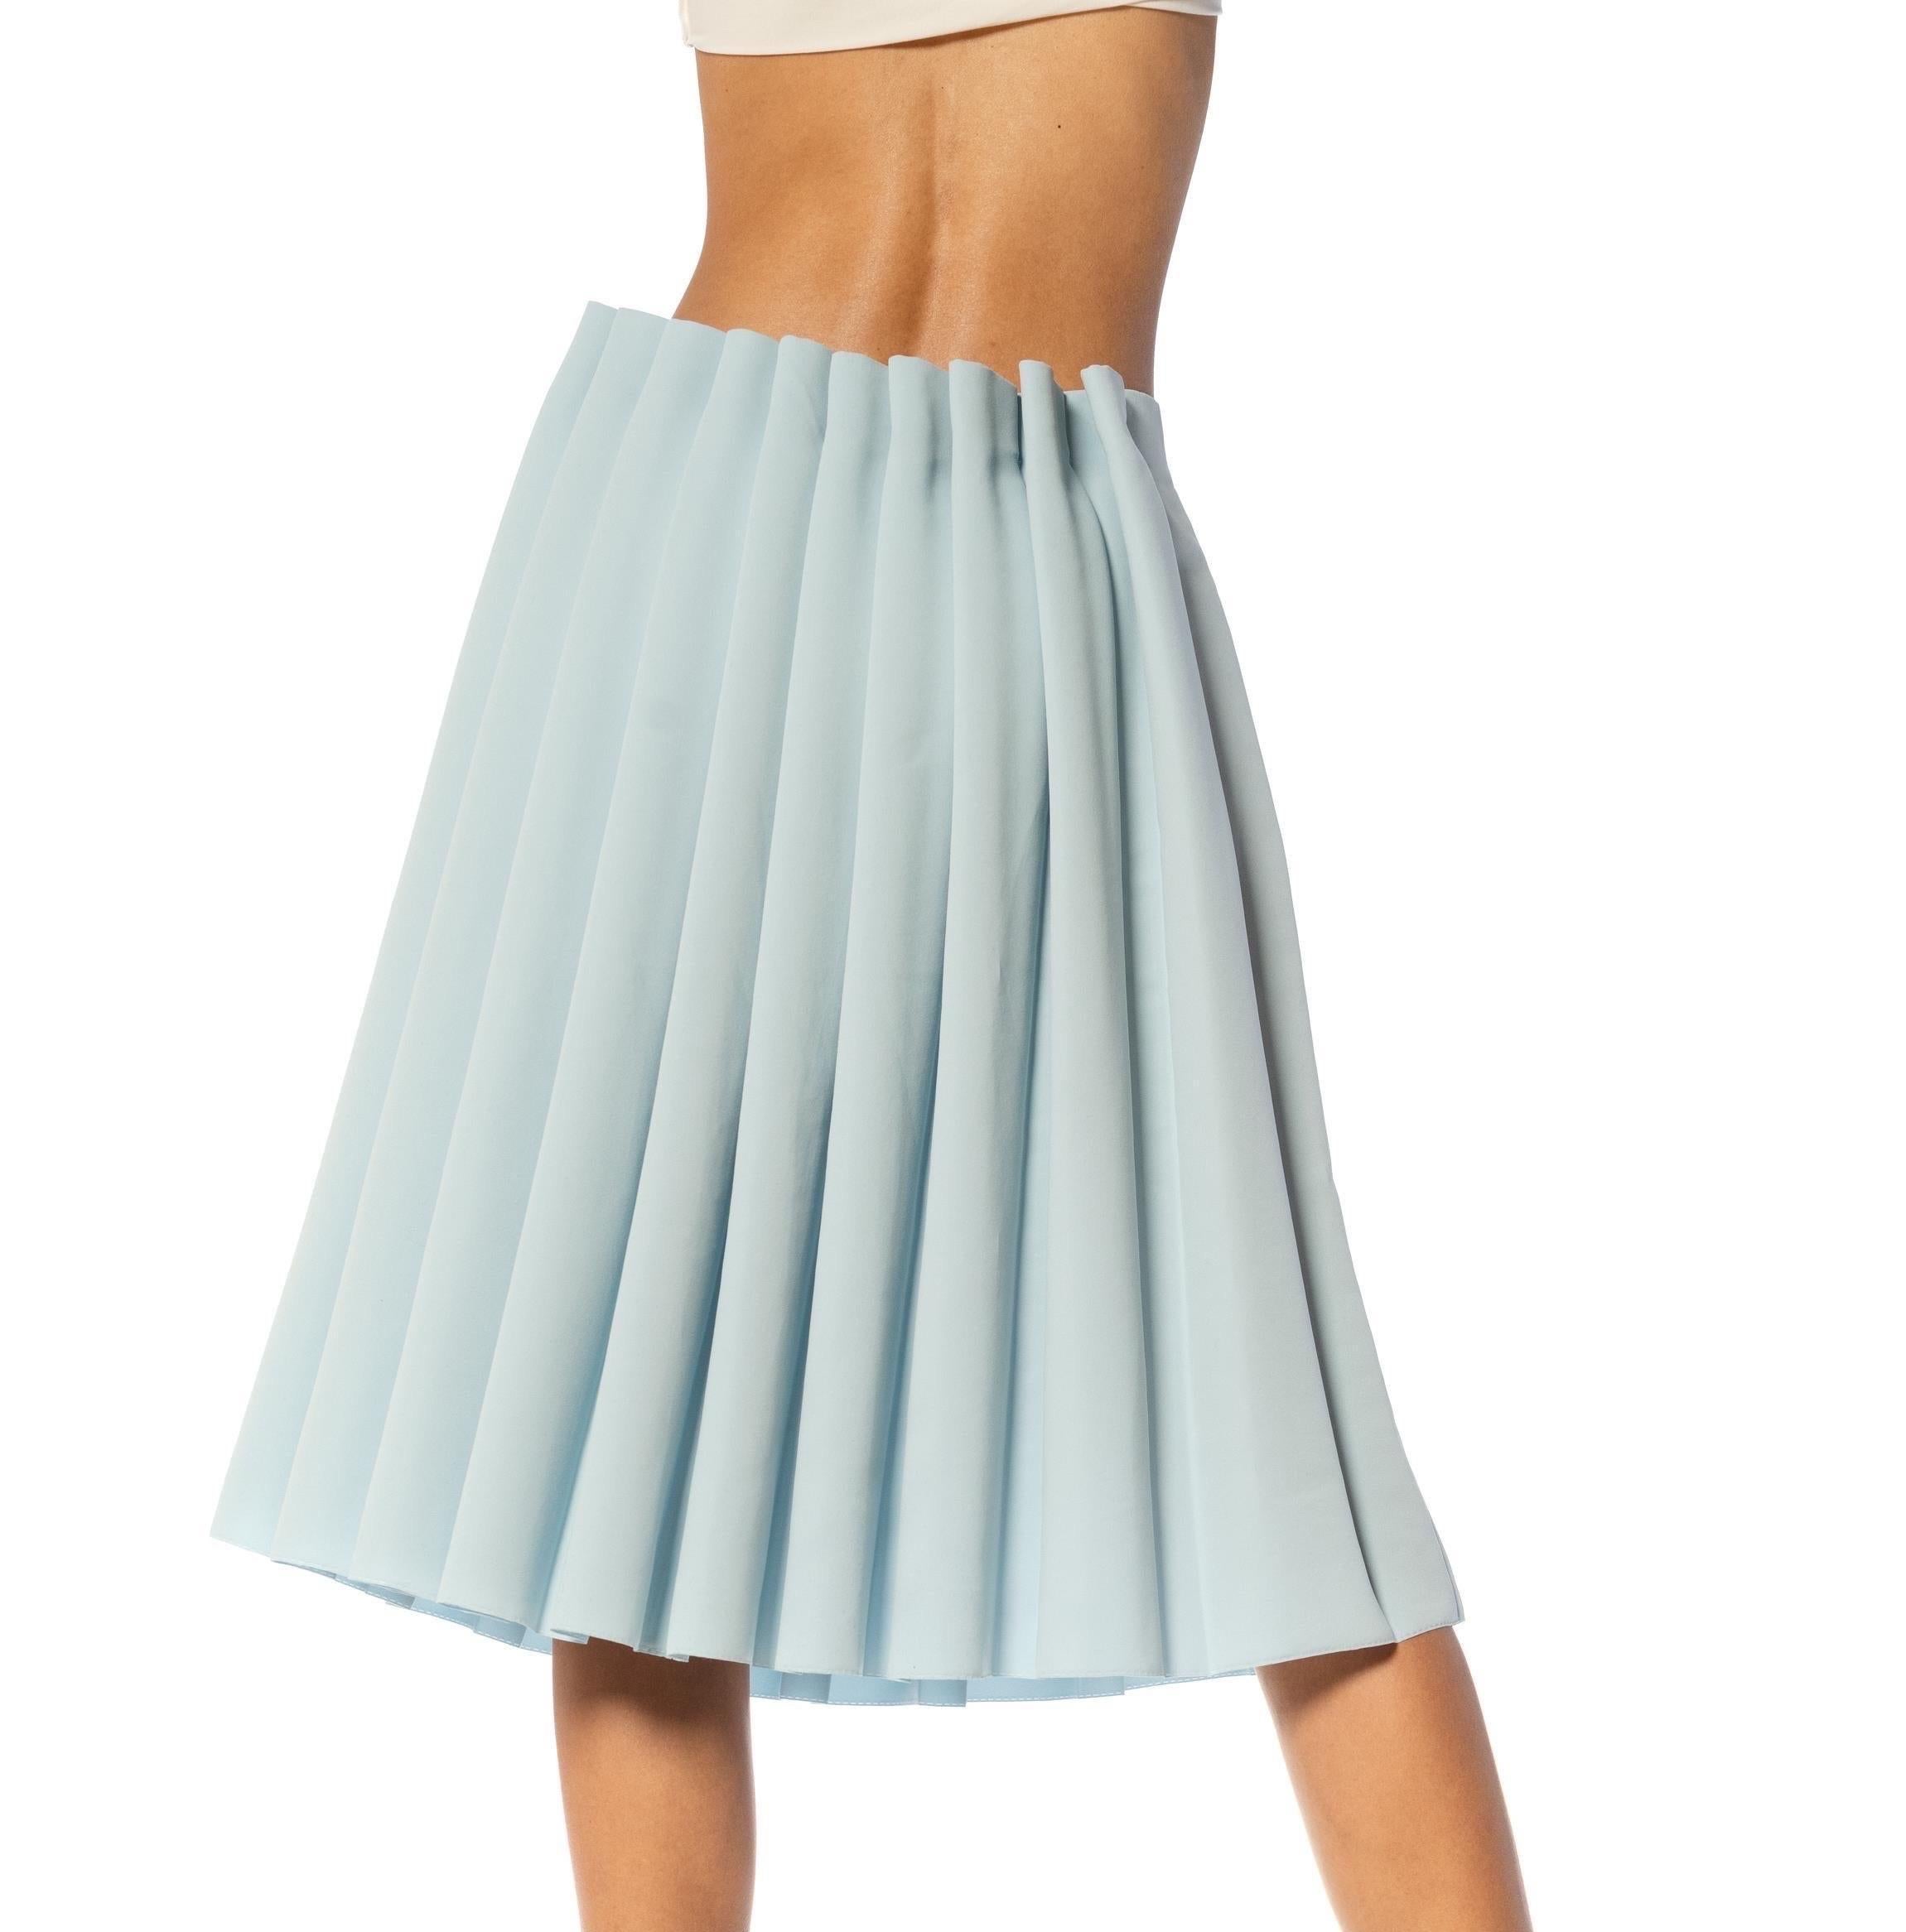 2000S ISSEY MIYAKE Powder Blue Cotton Pleated Skirt For Sale 4